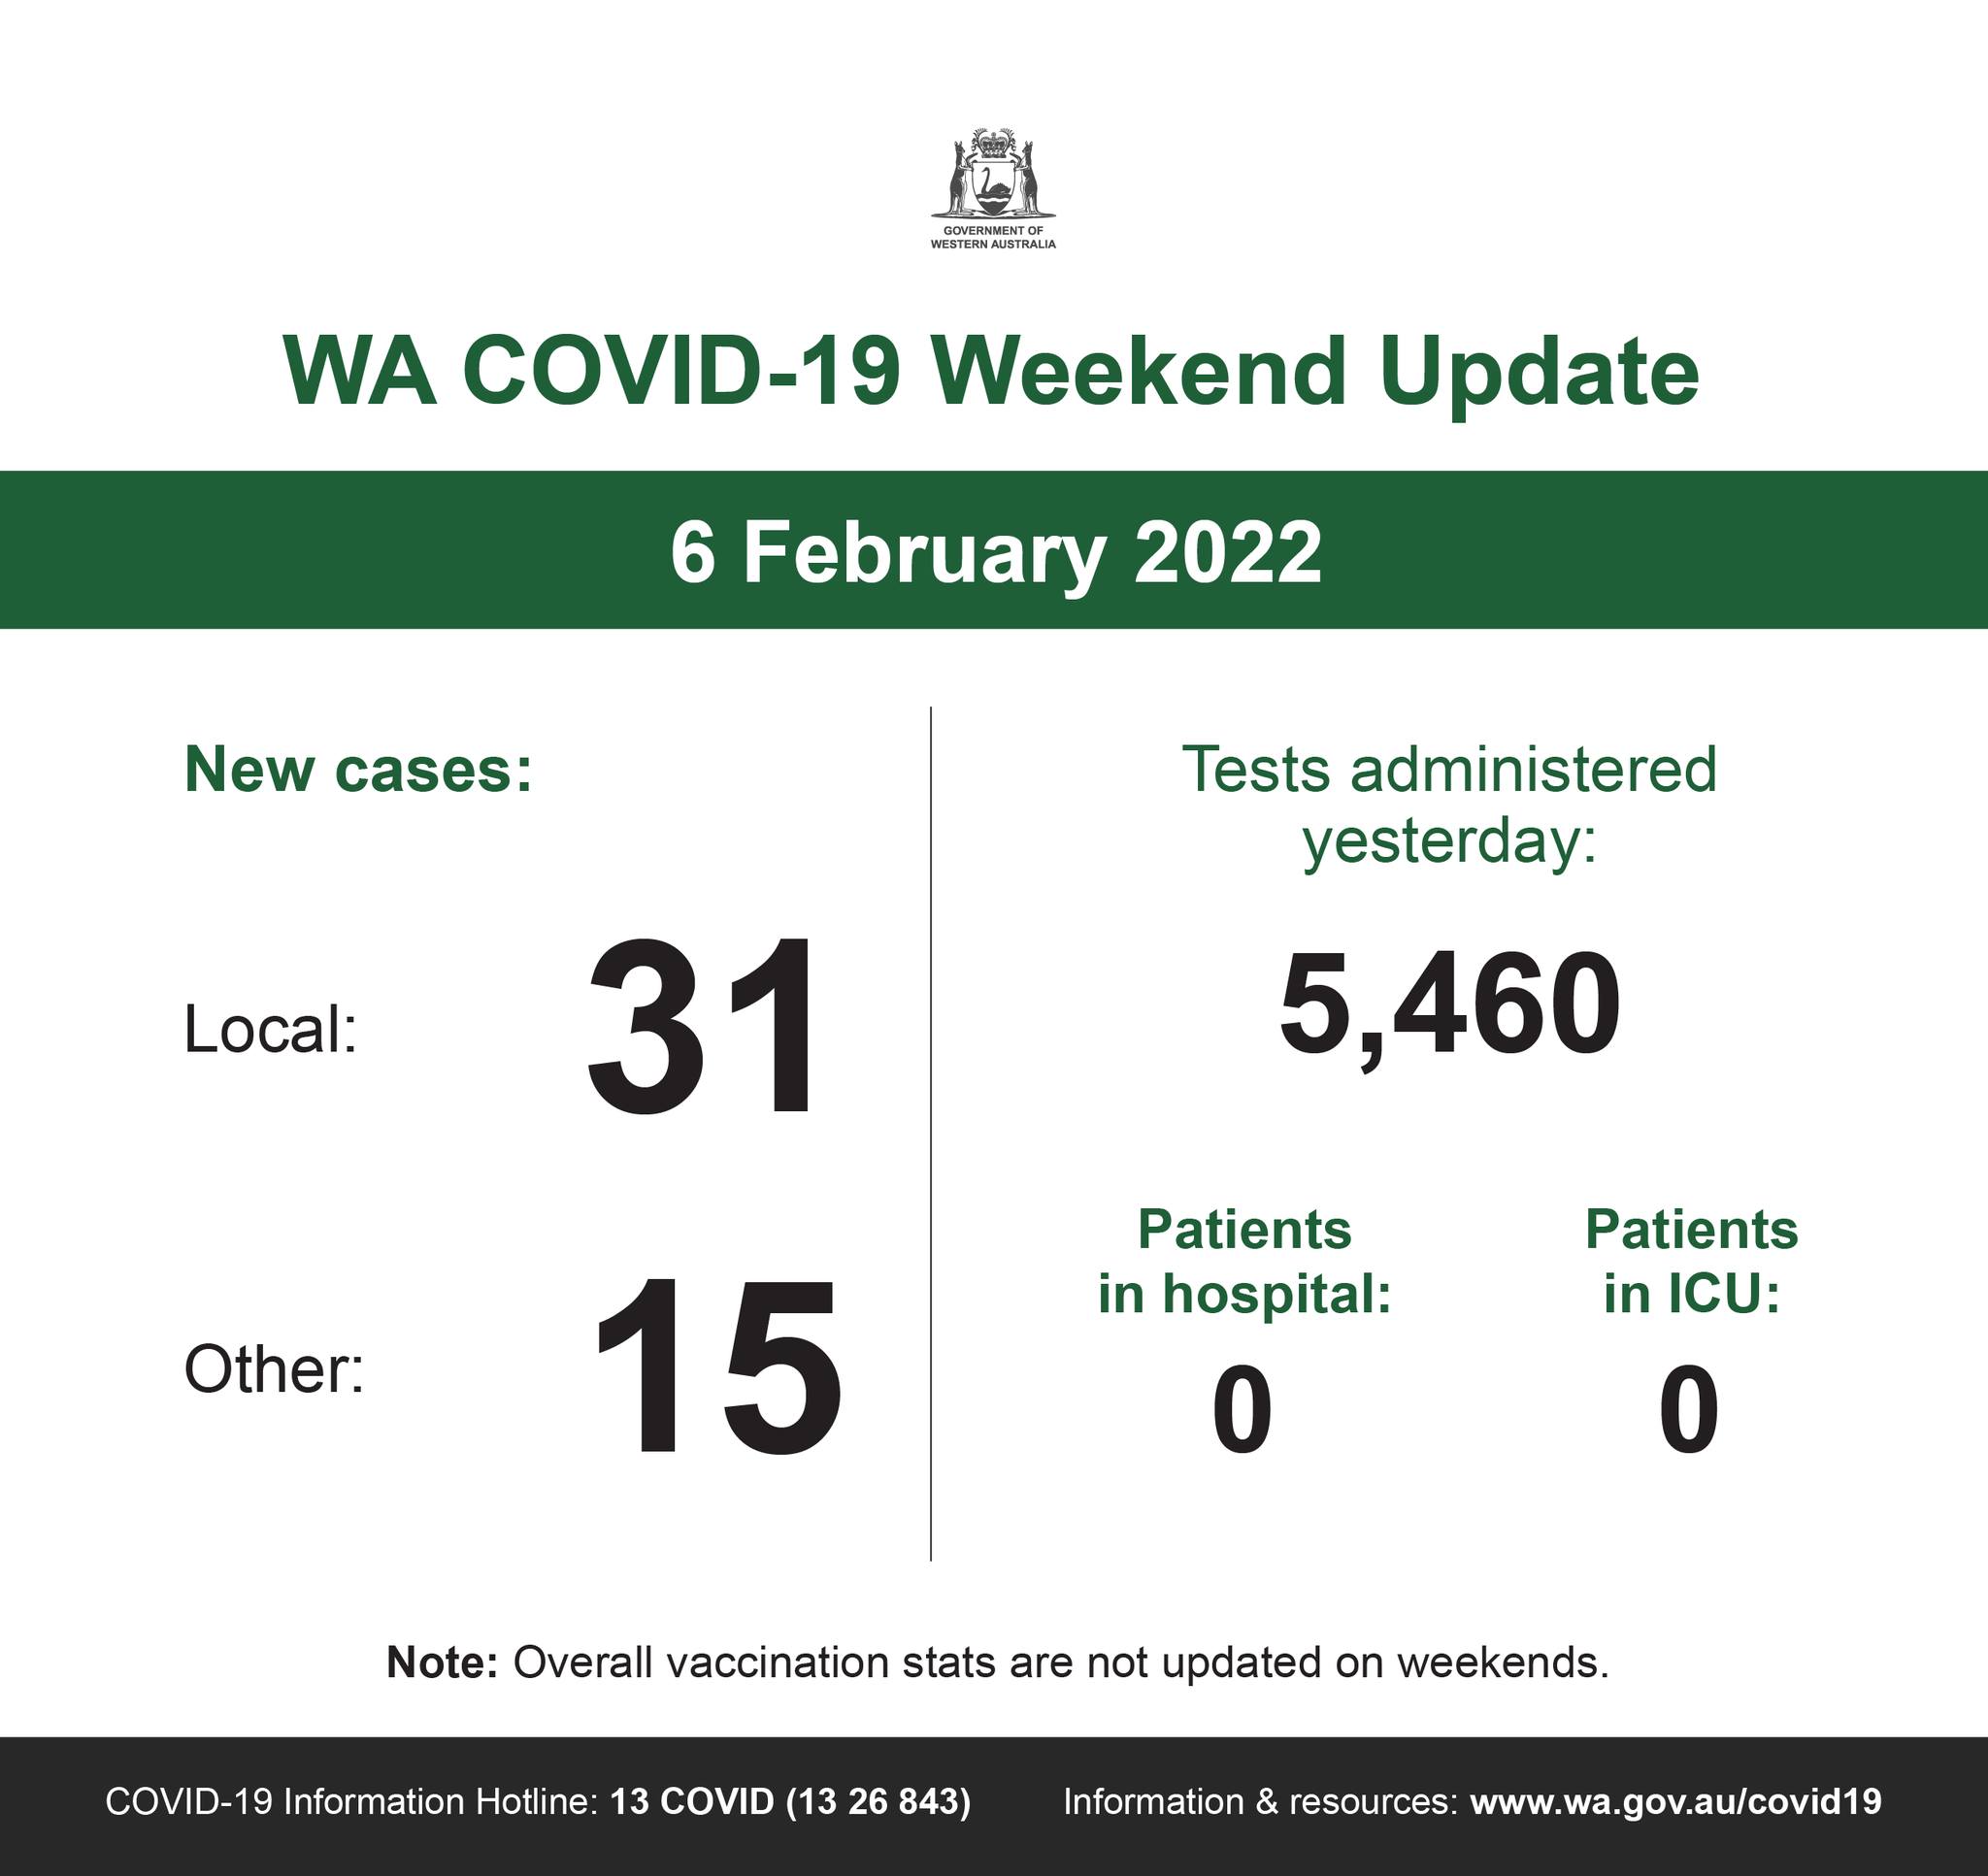 May be an image of text that says 'WA COVID-19 Weekend Update 6 February 2022 New cases: Local: Tests administered yesterday: 5,460 31 Other: Patients in hospital: 0 15 Patients in ICU: 0 Note: Overall vaccination stats are not updated on weekends. COVID-19 nformation Hotline: 13 COVID (13 26 843) Information resources www. wa au/covid19'